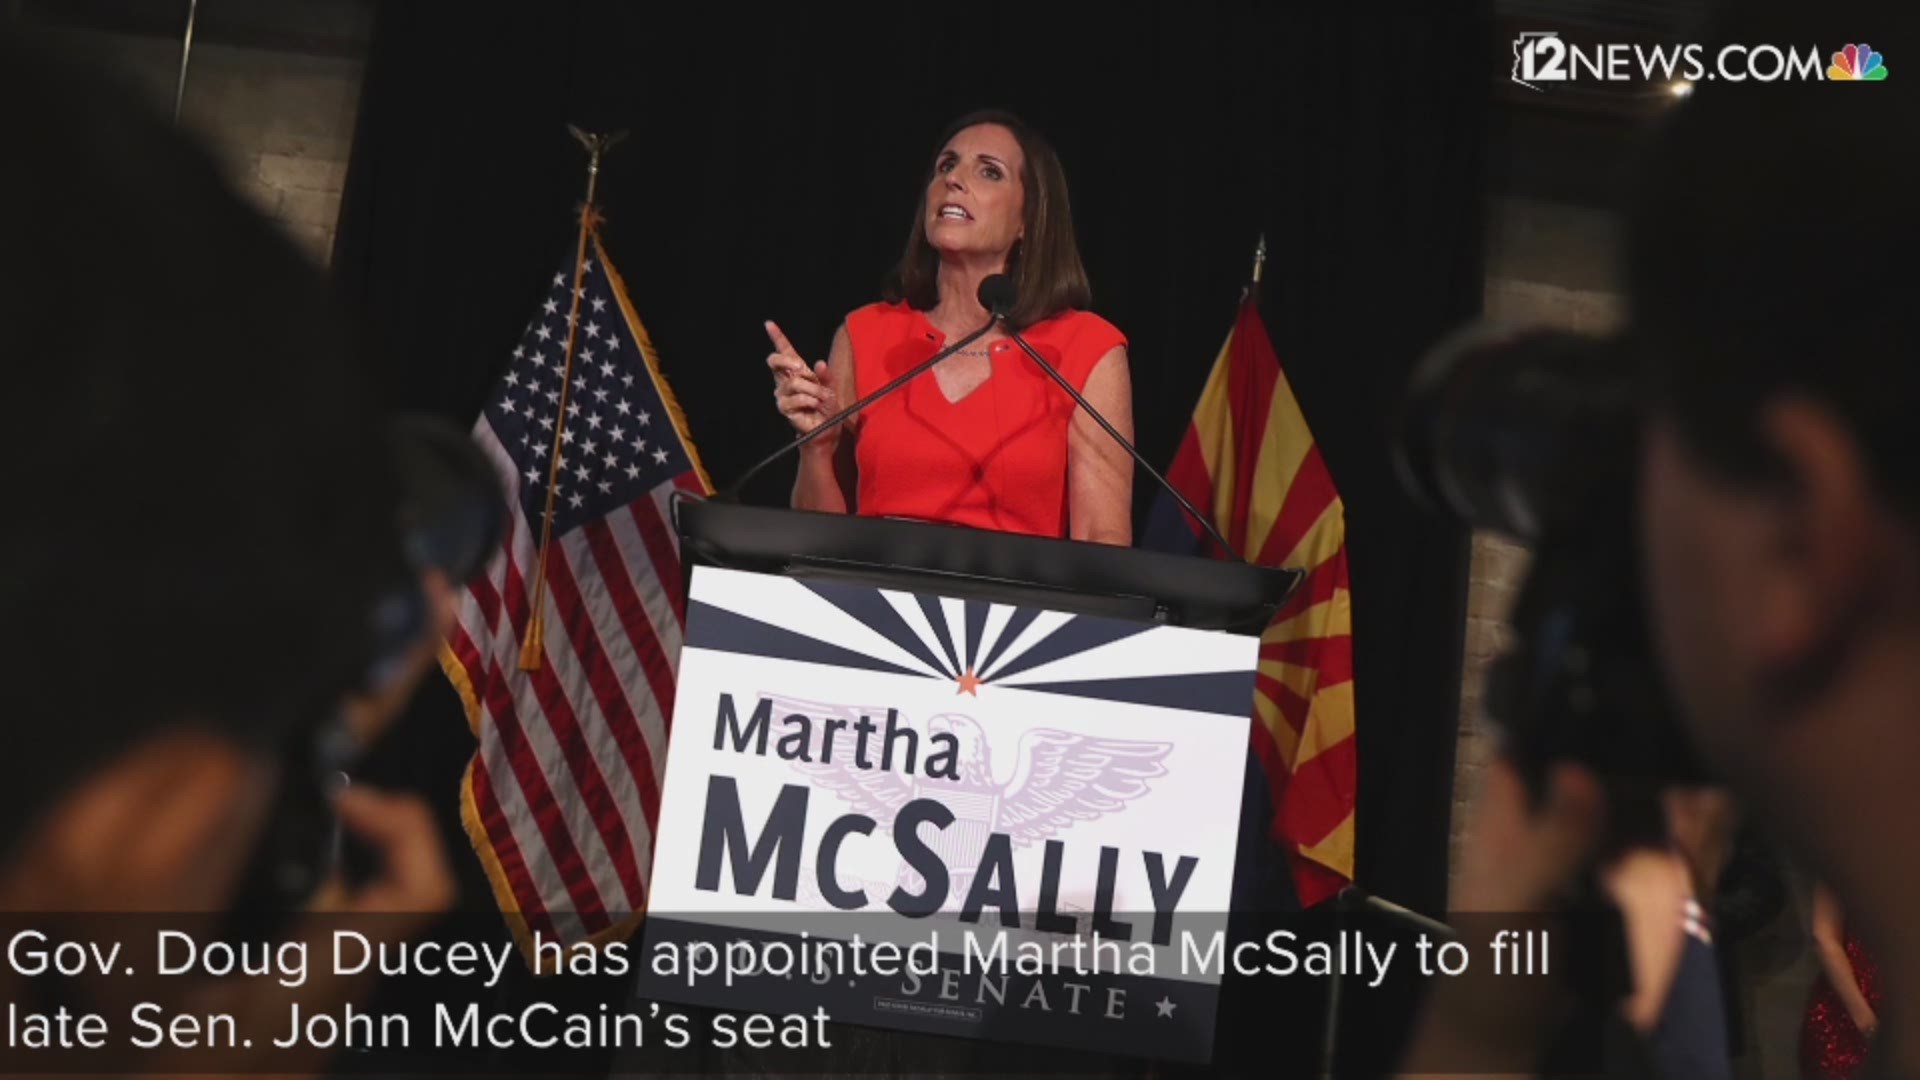 Gov. Doug Ducey appointed Congresswoman Martha McSally to fill late Sen. John McCain's seat a month after she lost the contested Arizona Senate race against Kyrsten Sinema.